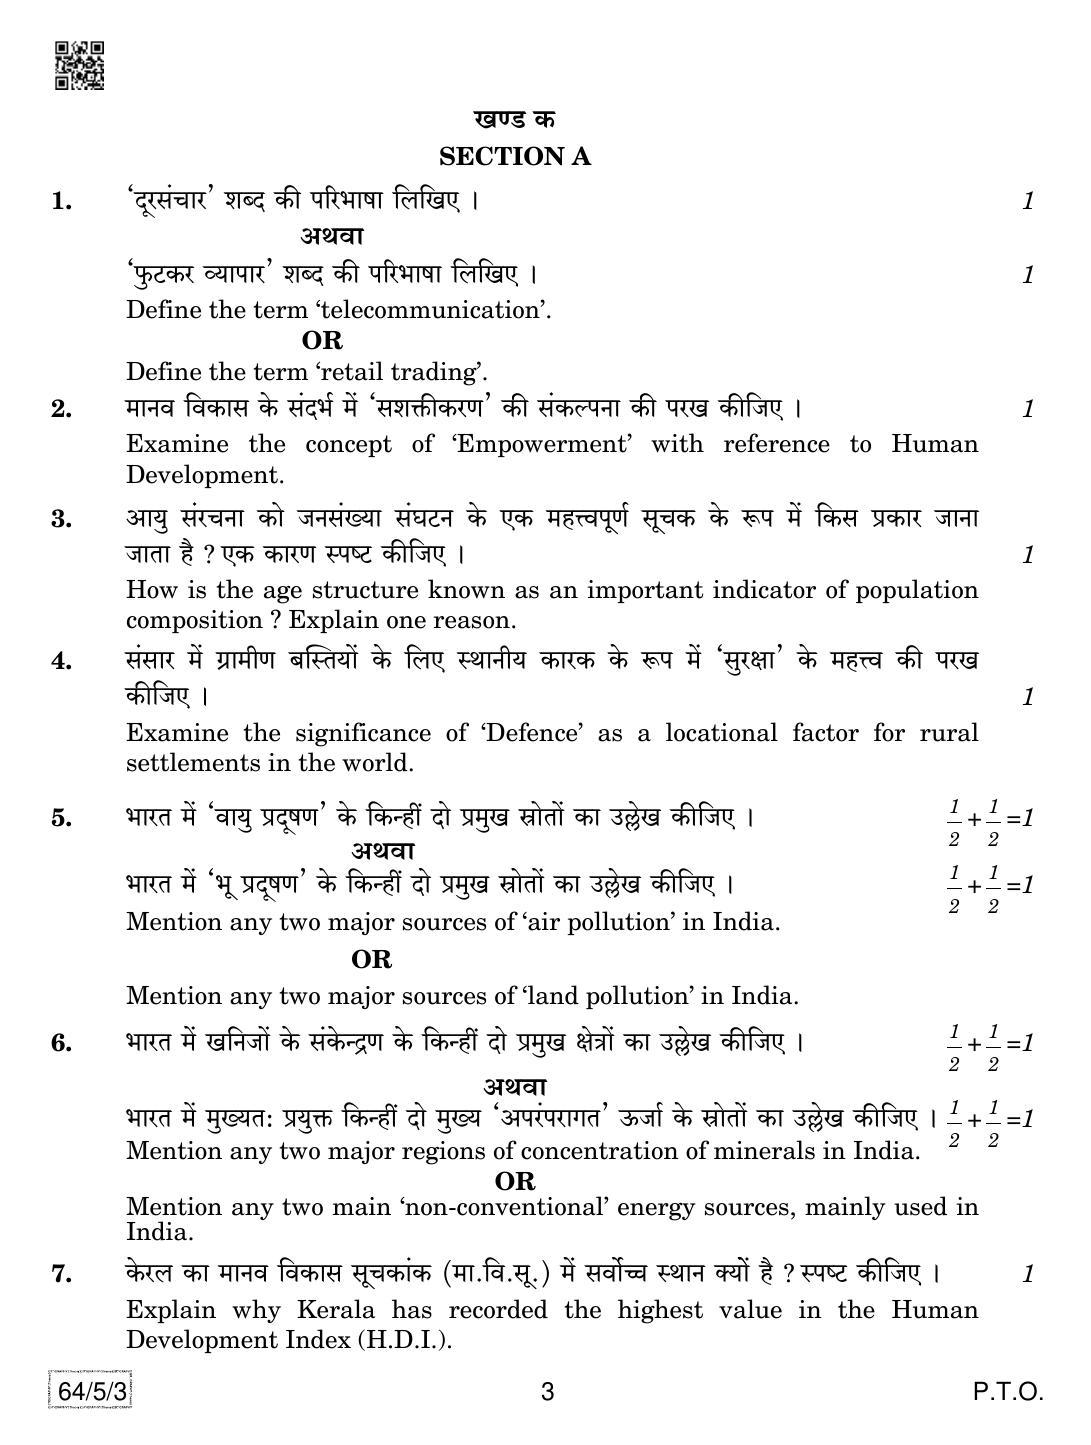 CBSE Class 12 64-5-3 Geography 2019 Question Paper - Page 3